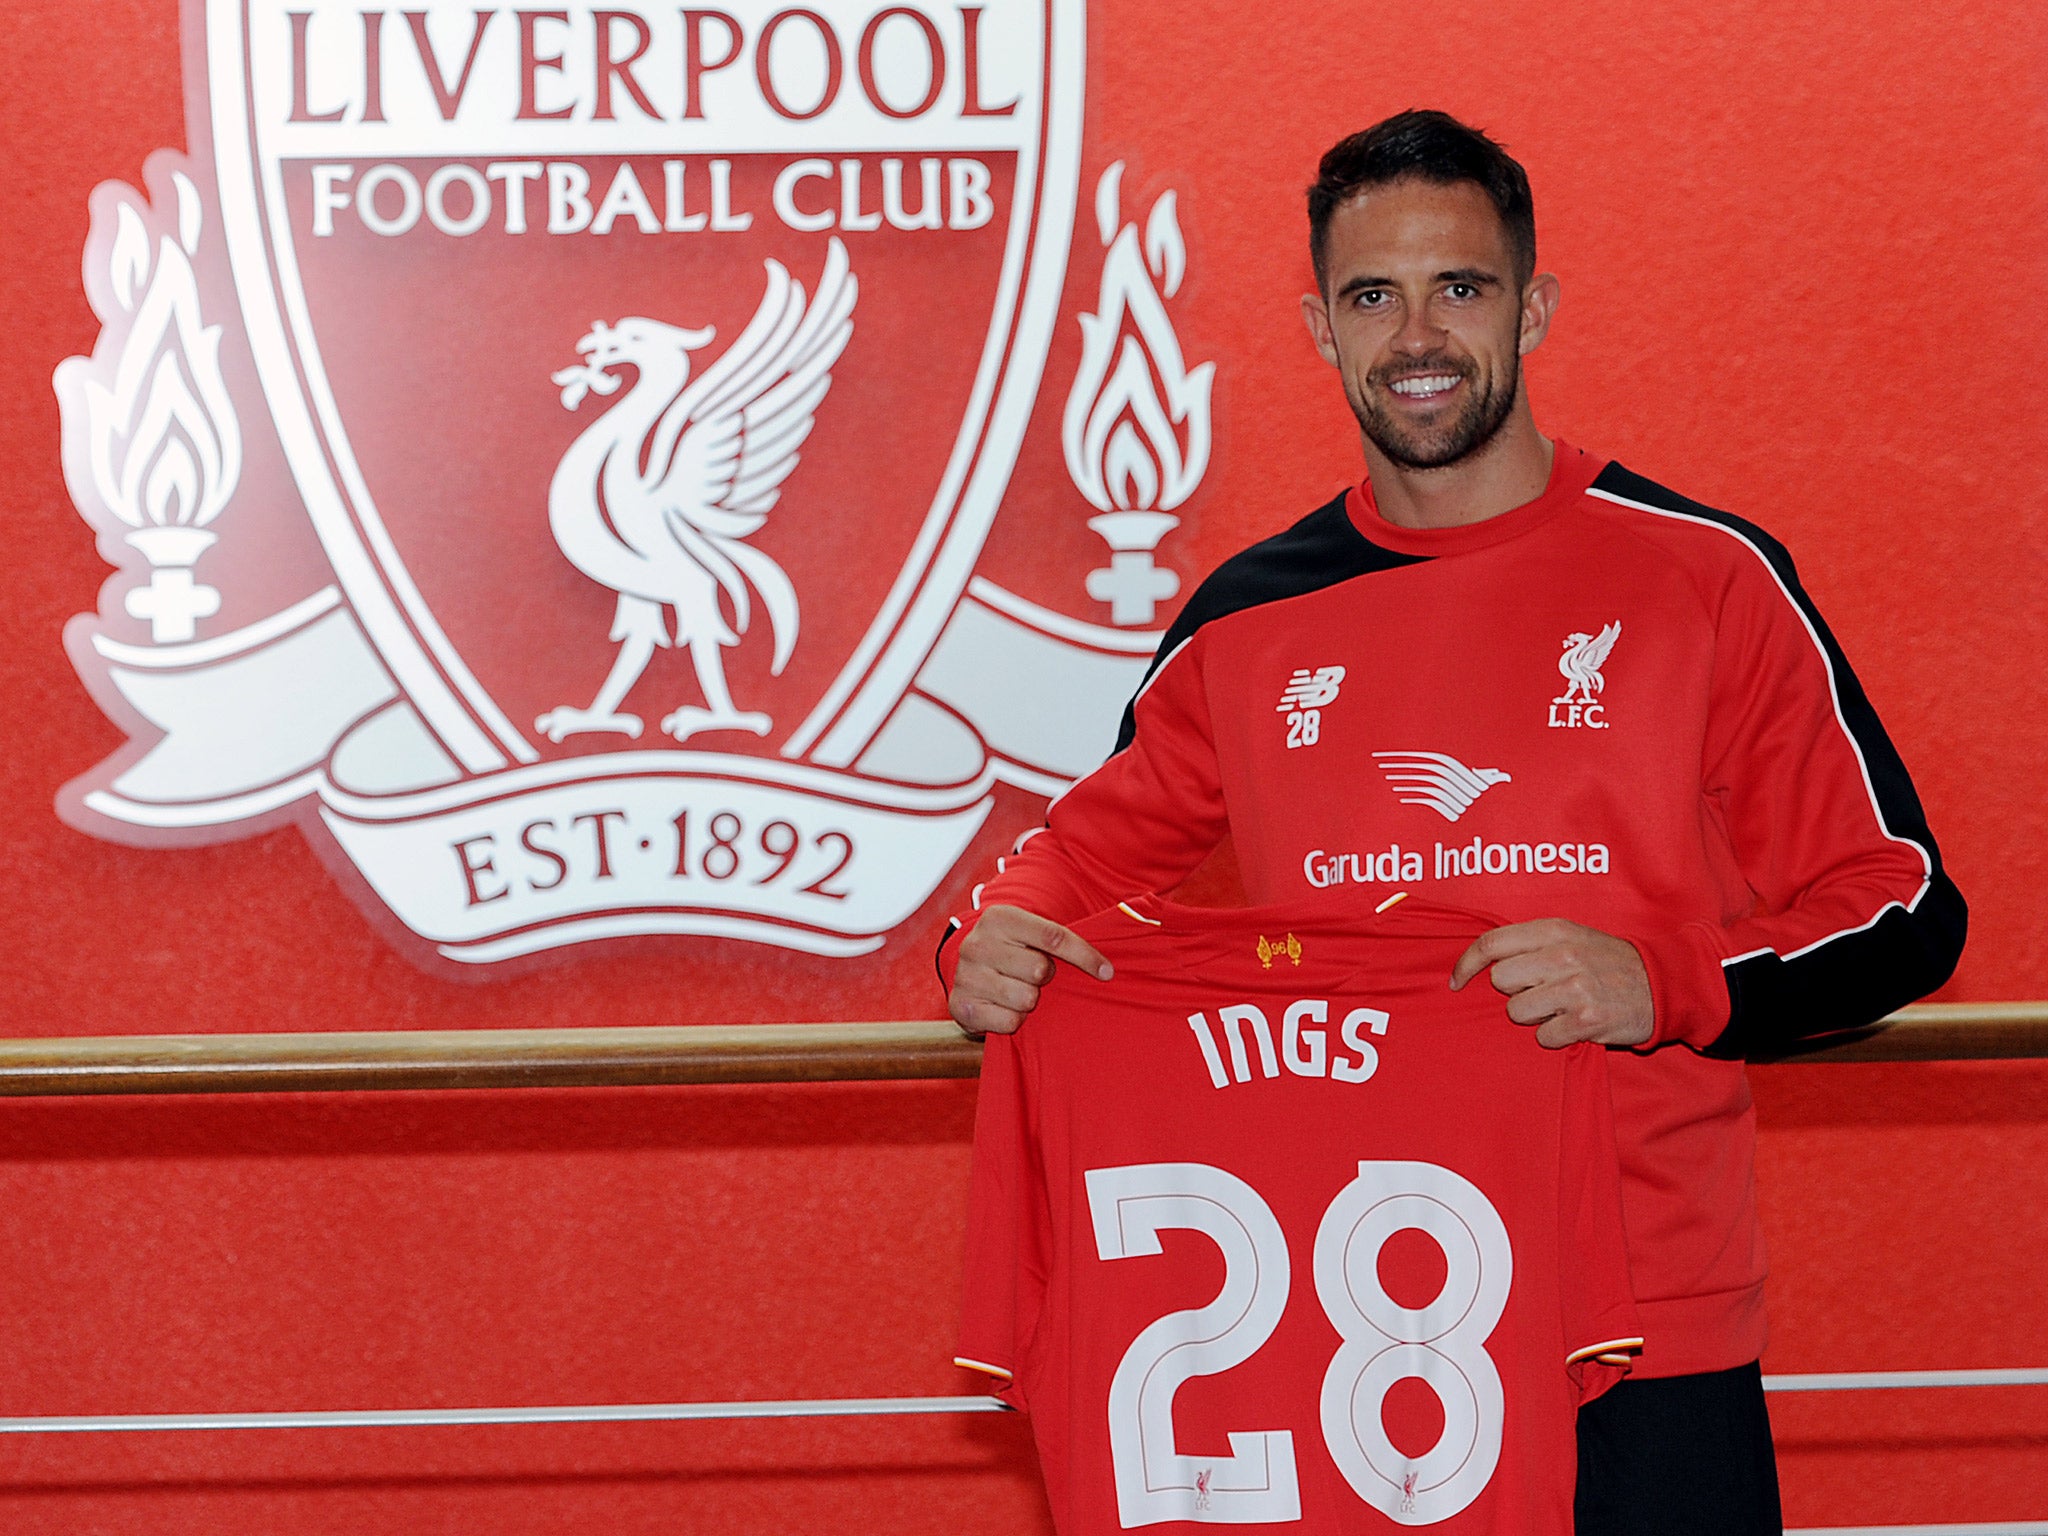 Danny Ings joined Liverpool last summer